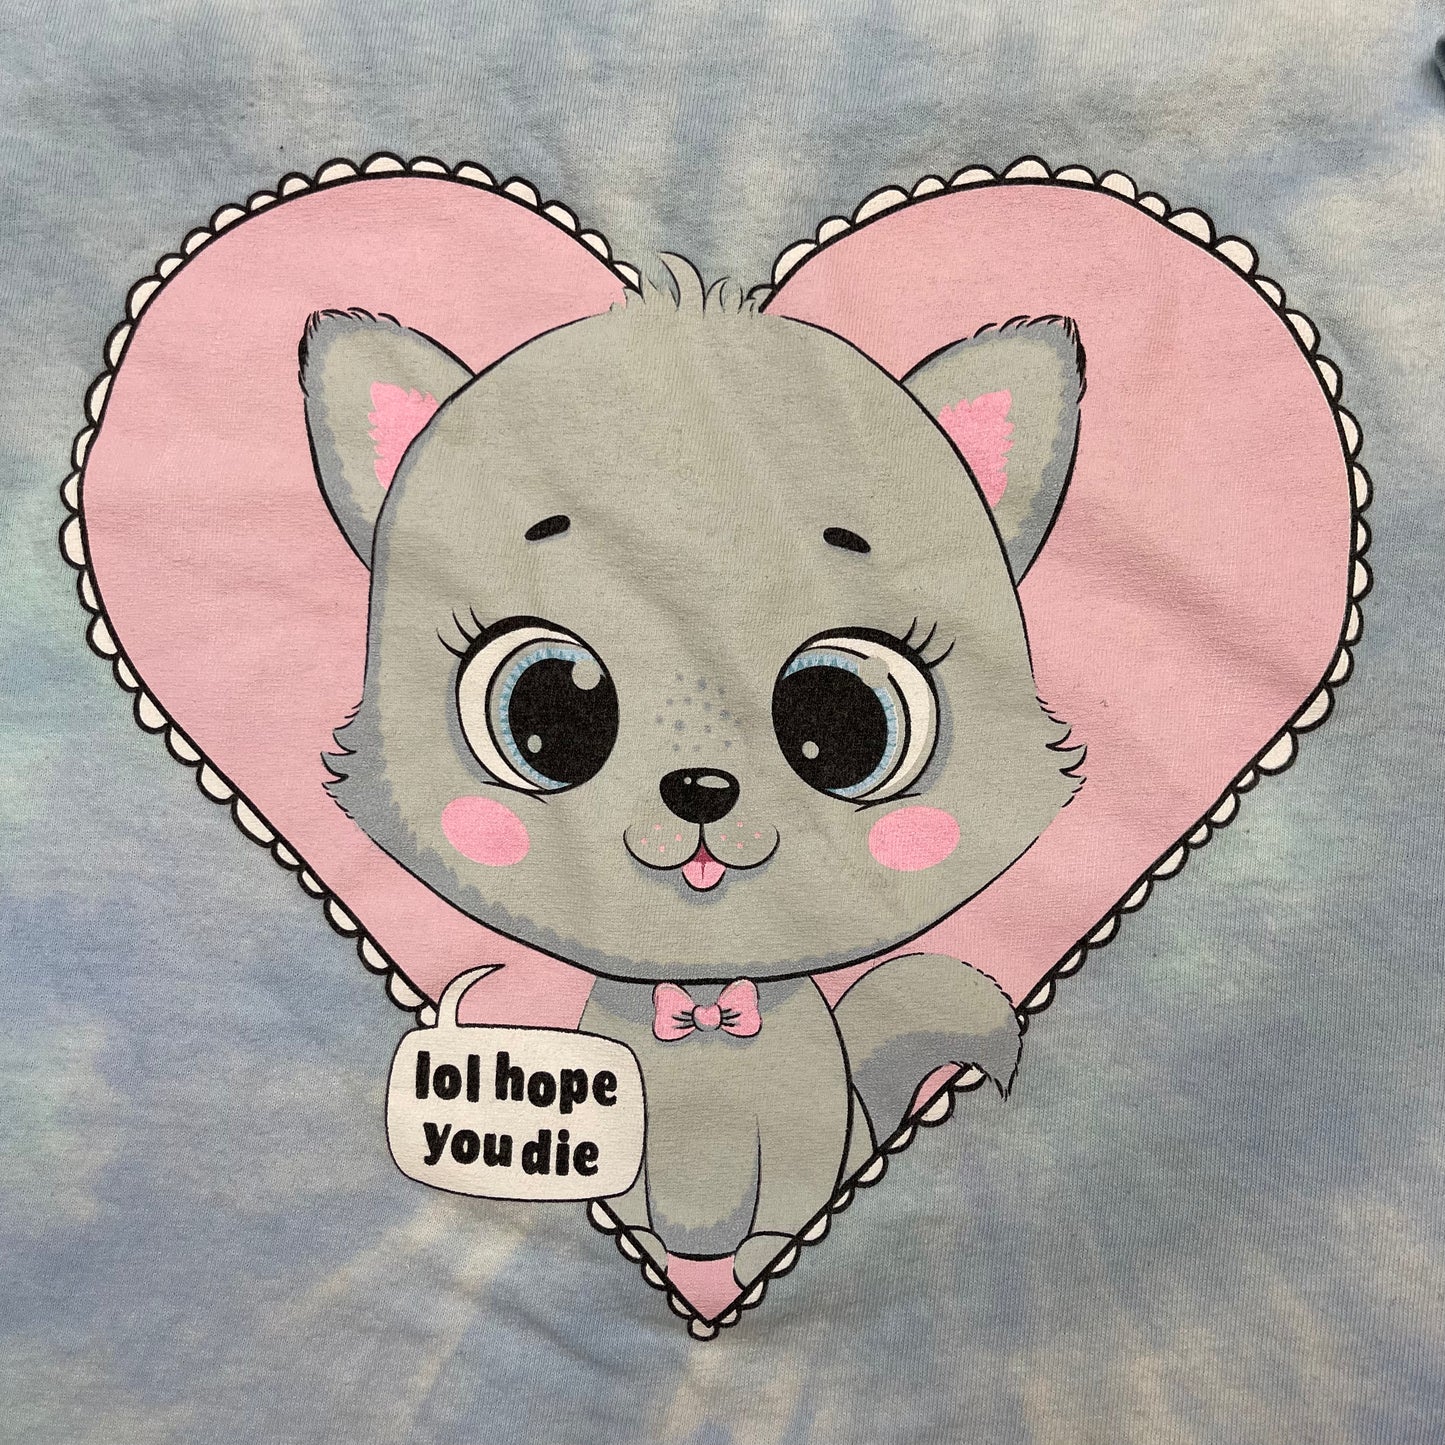 THRIFTED “LOL HOPE YOU DIE” CROPPED TEE